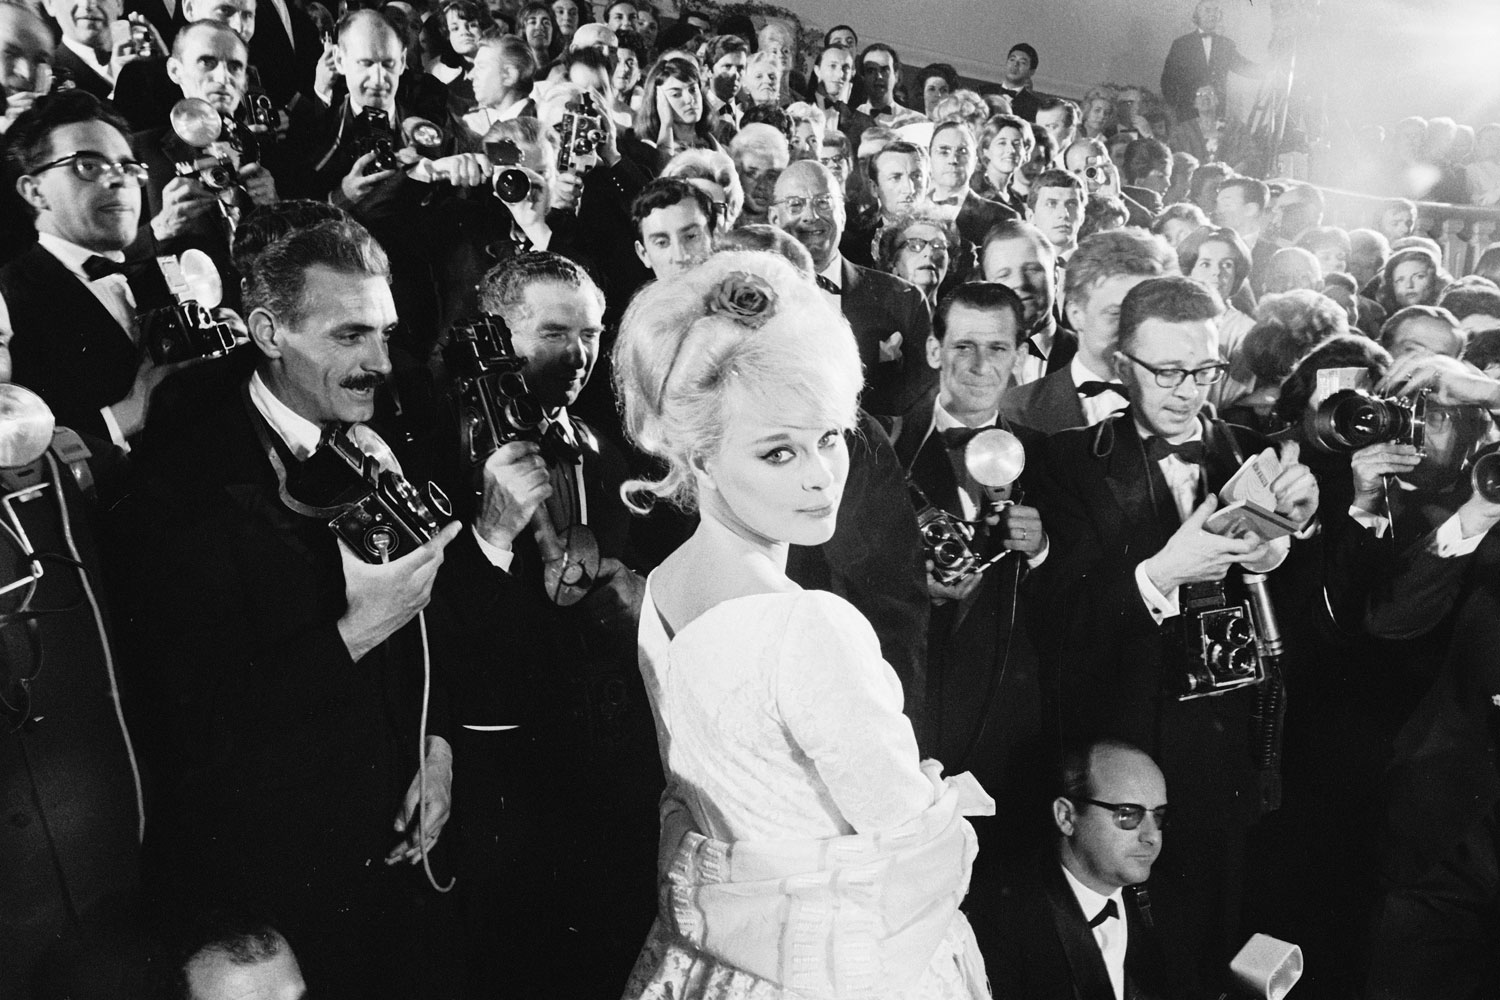 German actress Elke Sommer at Cannes, 1962.